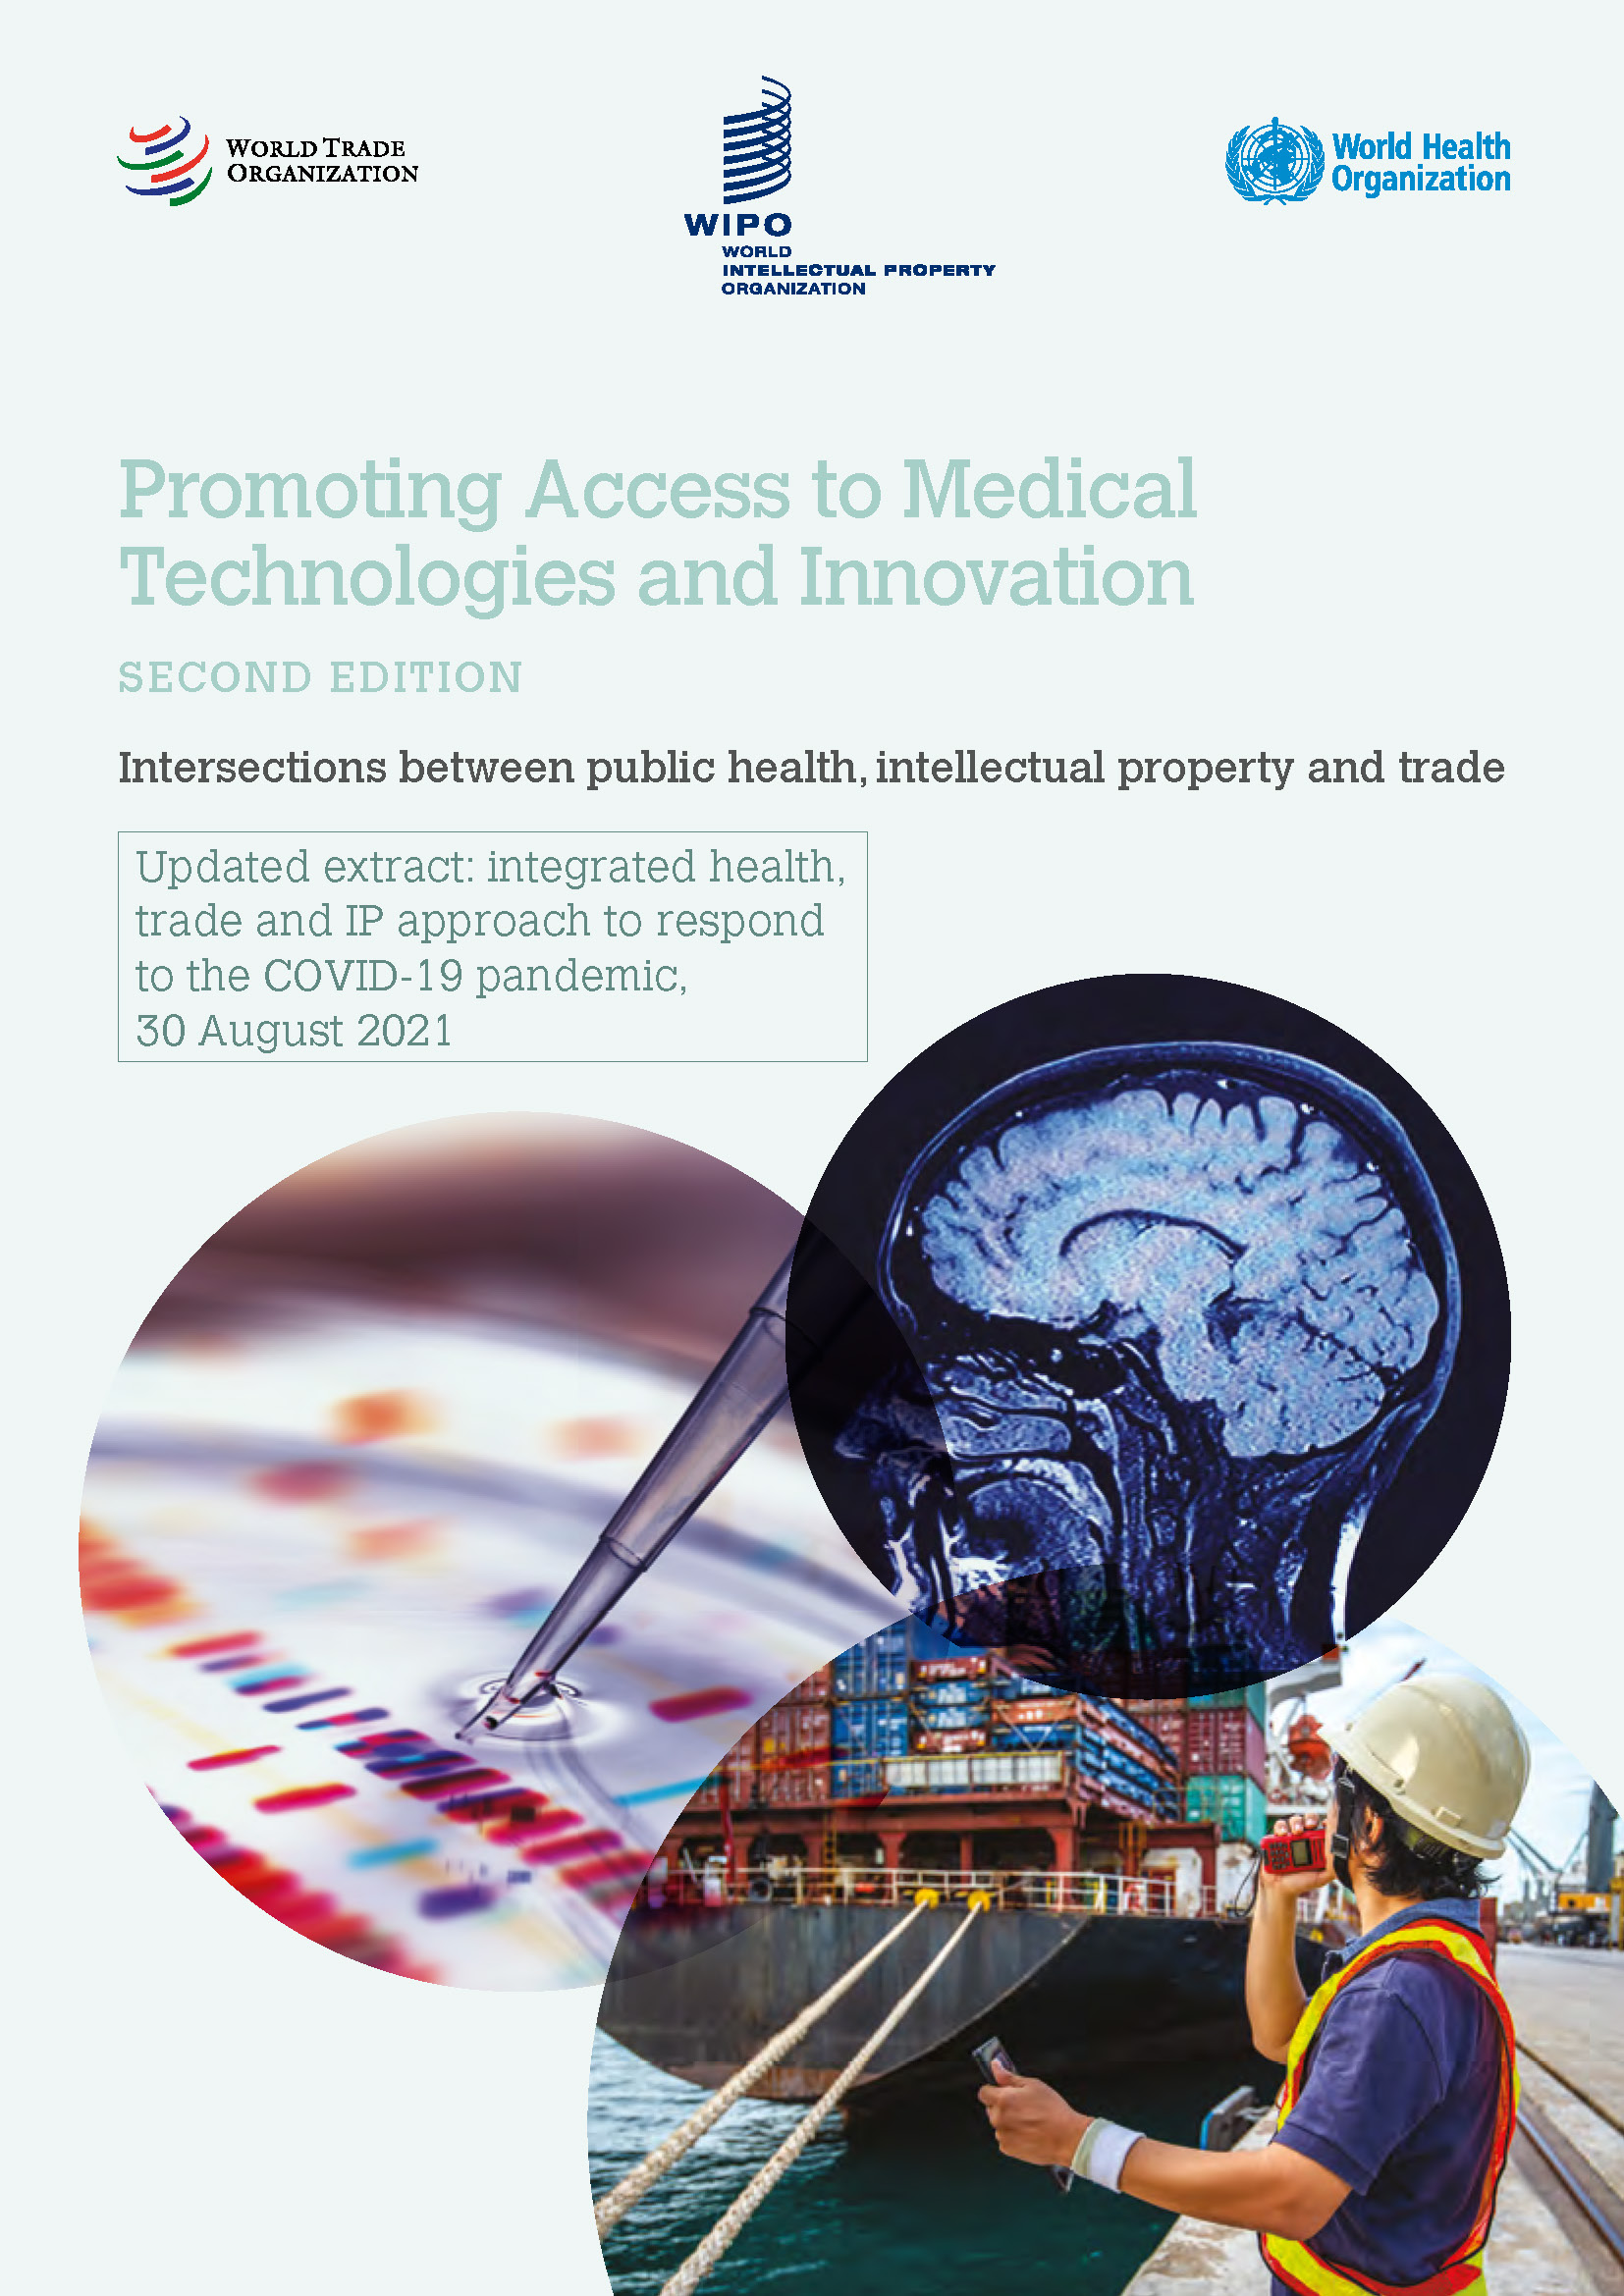 image of Meeting the demand for health technologies and medical services